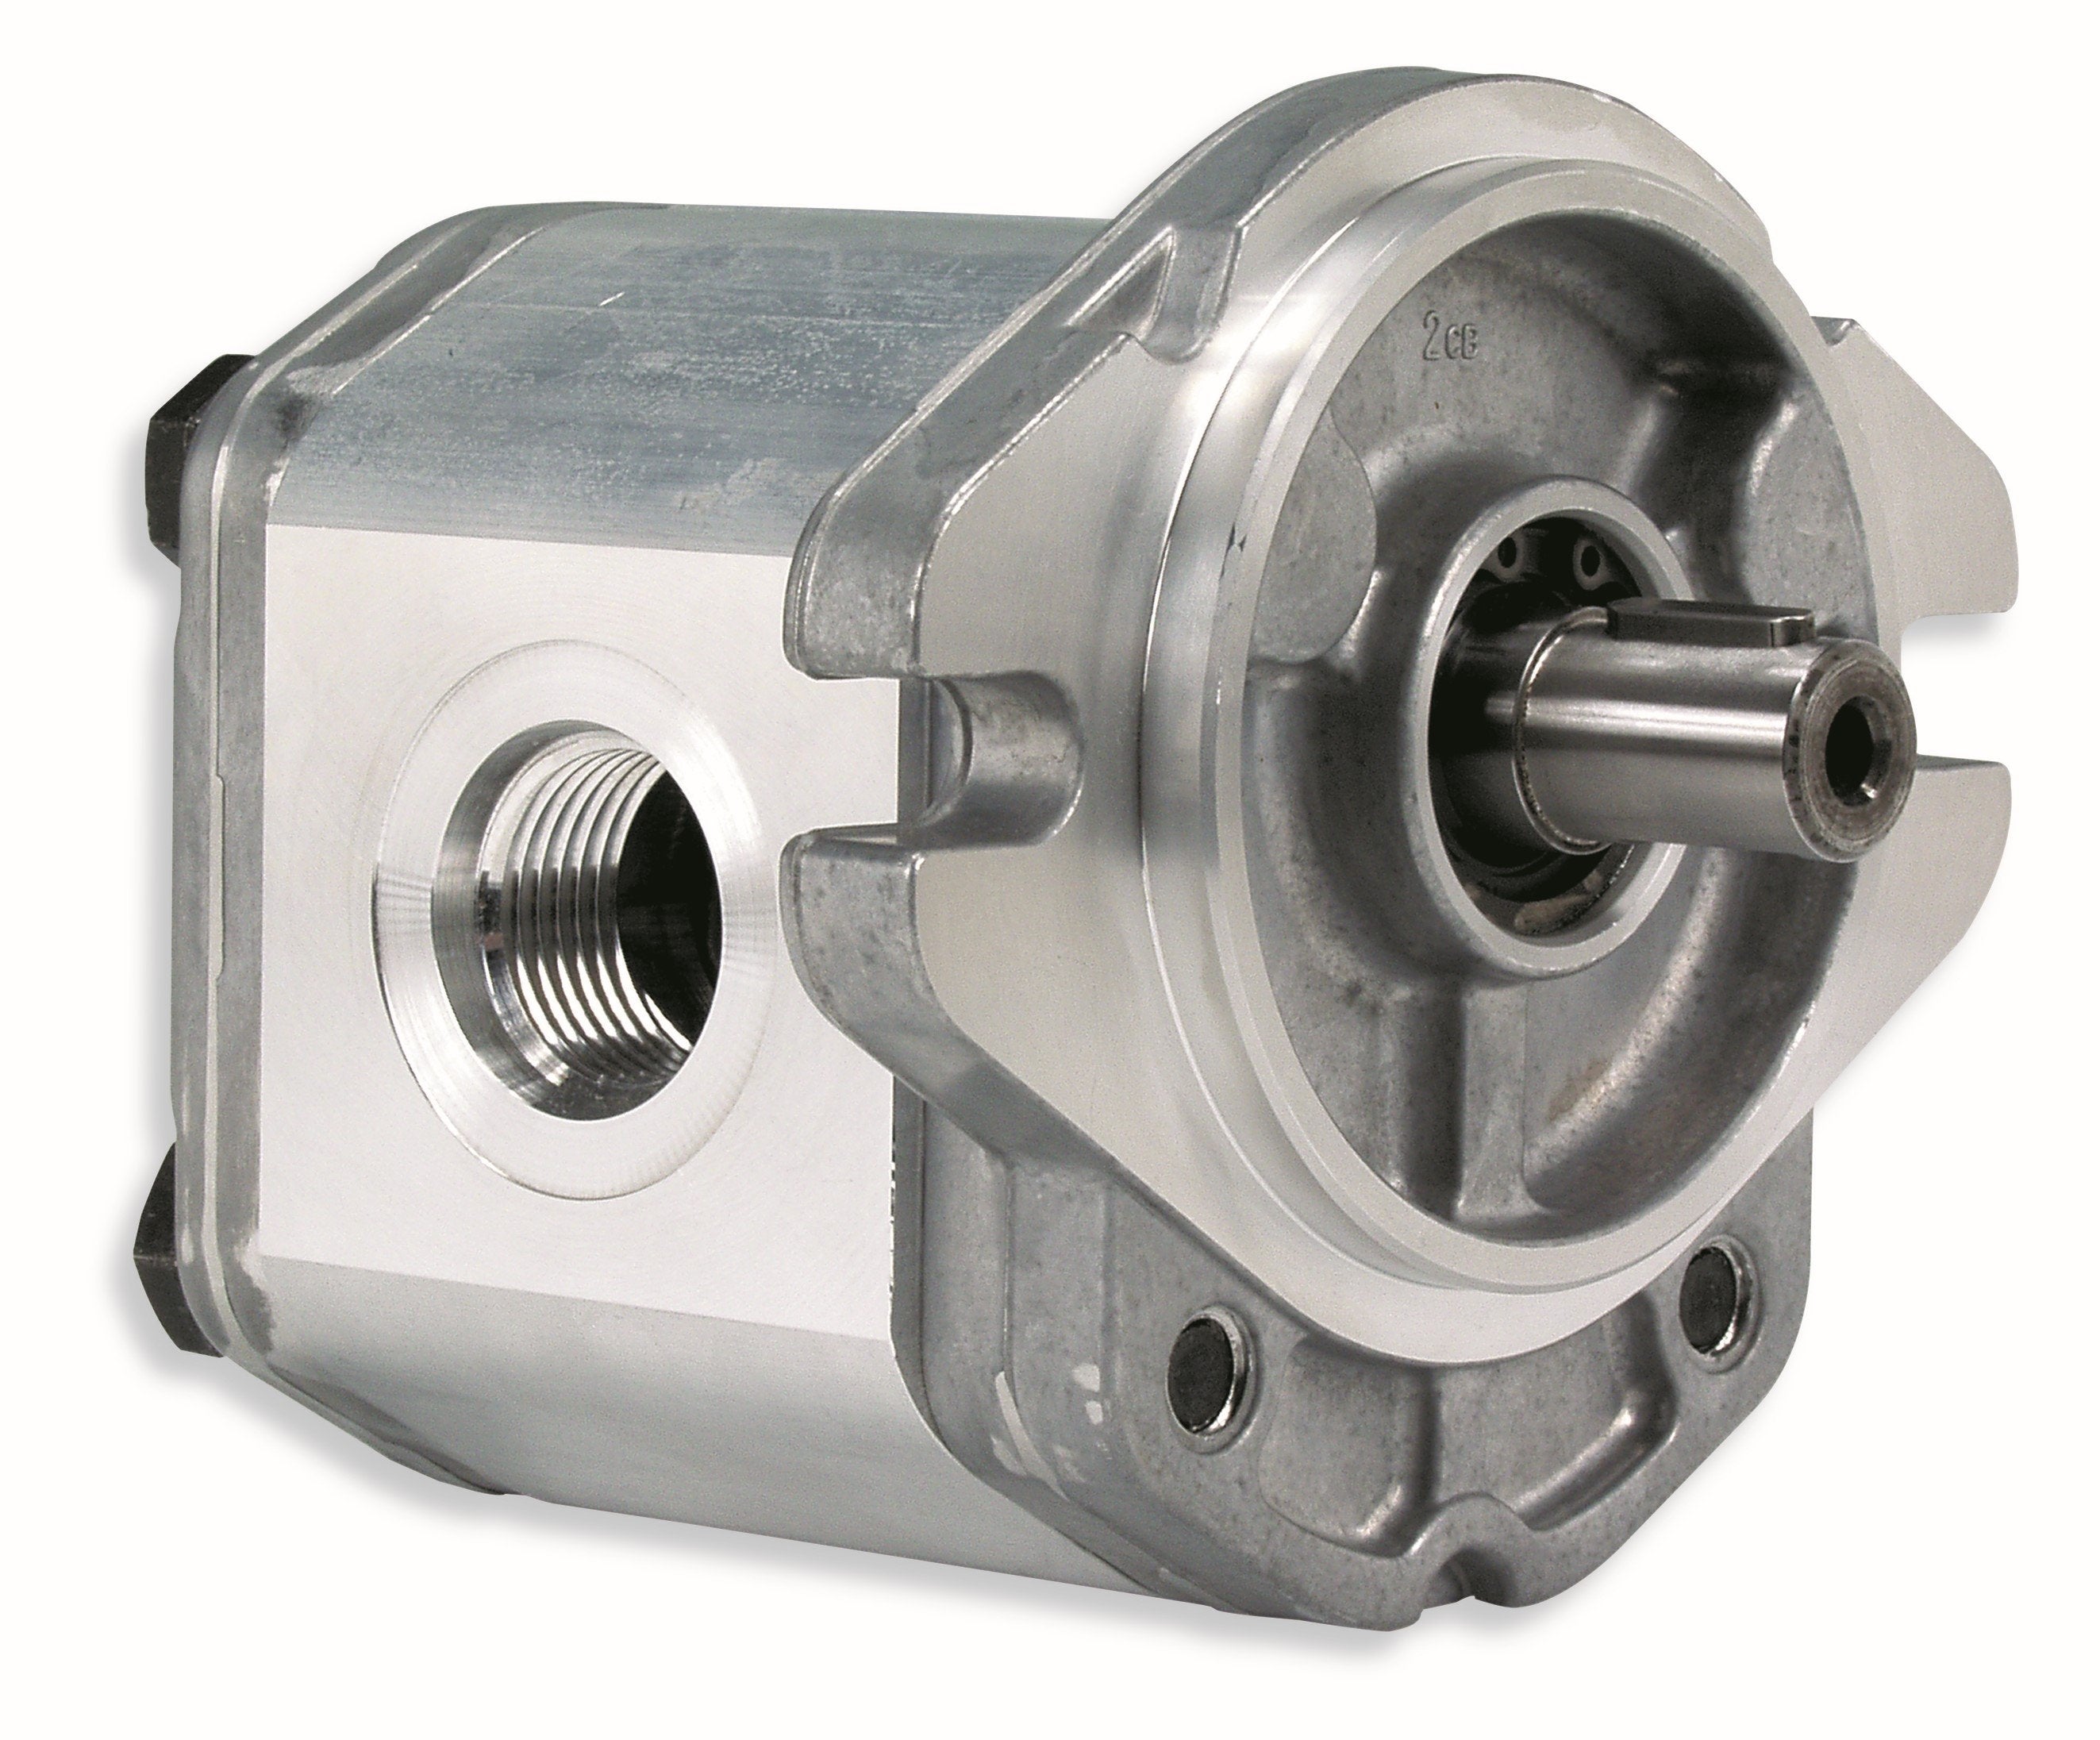 GHM2A-R-25-E2 : Marzocchi Gear Motor, Bidirectional, 17.9cc, 3770psi rated, 2500RPM, 0.75 (3/4") #12 SAE ports, 5/8" Bore x 5/32" Keyed Shaft